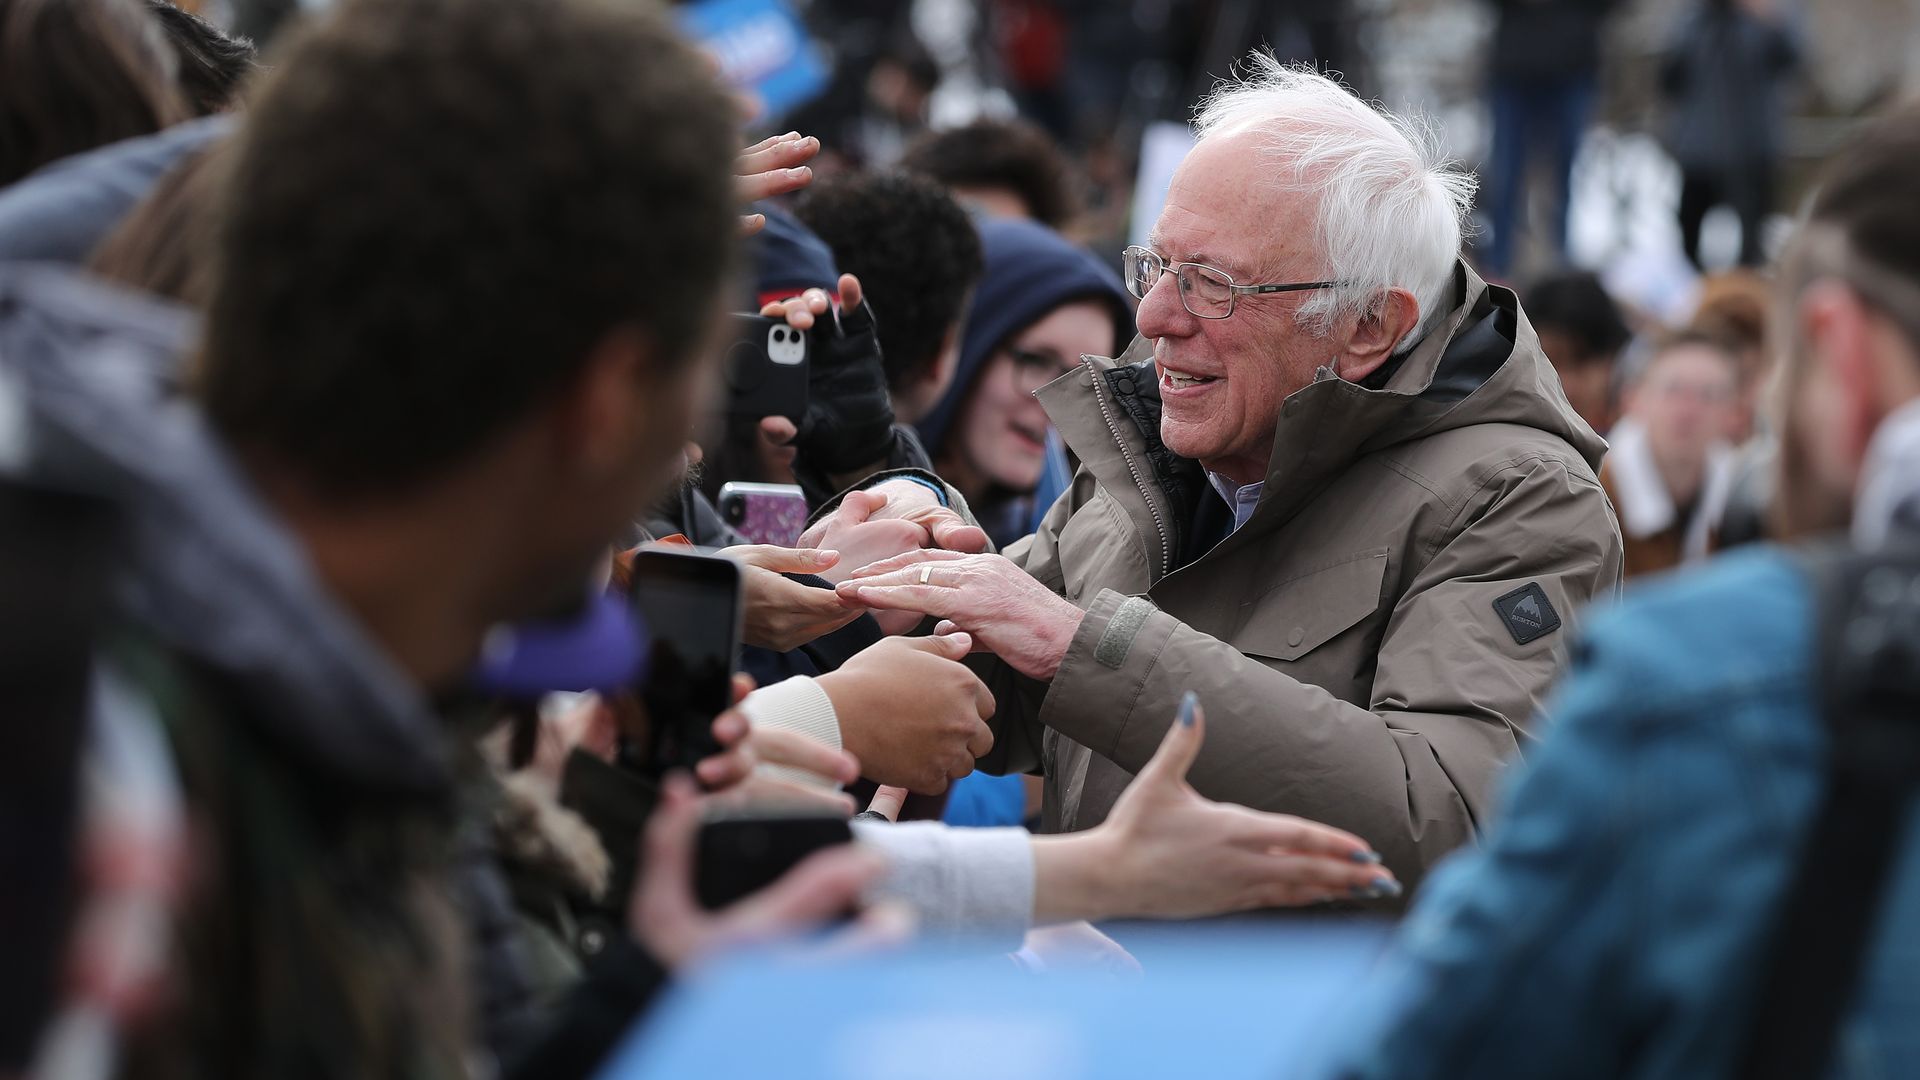 Vermont Sen. Bernie Sanders campaigns in Salt Lake City on the eve of Super Tuesday 2020.